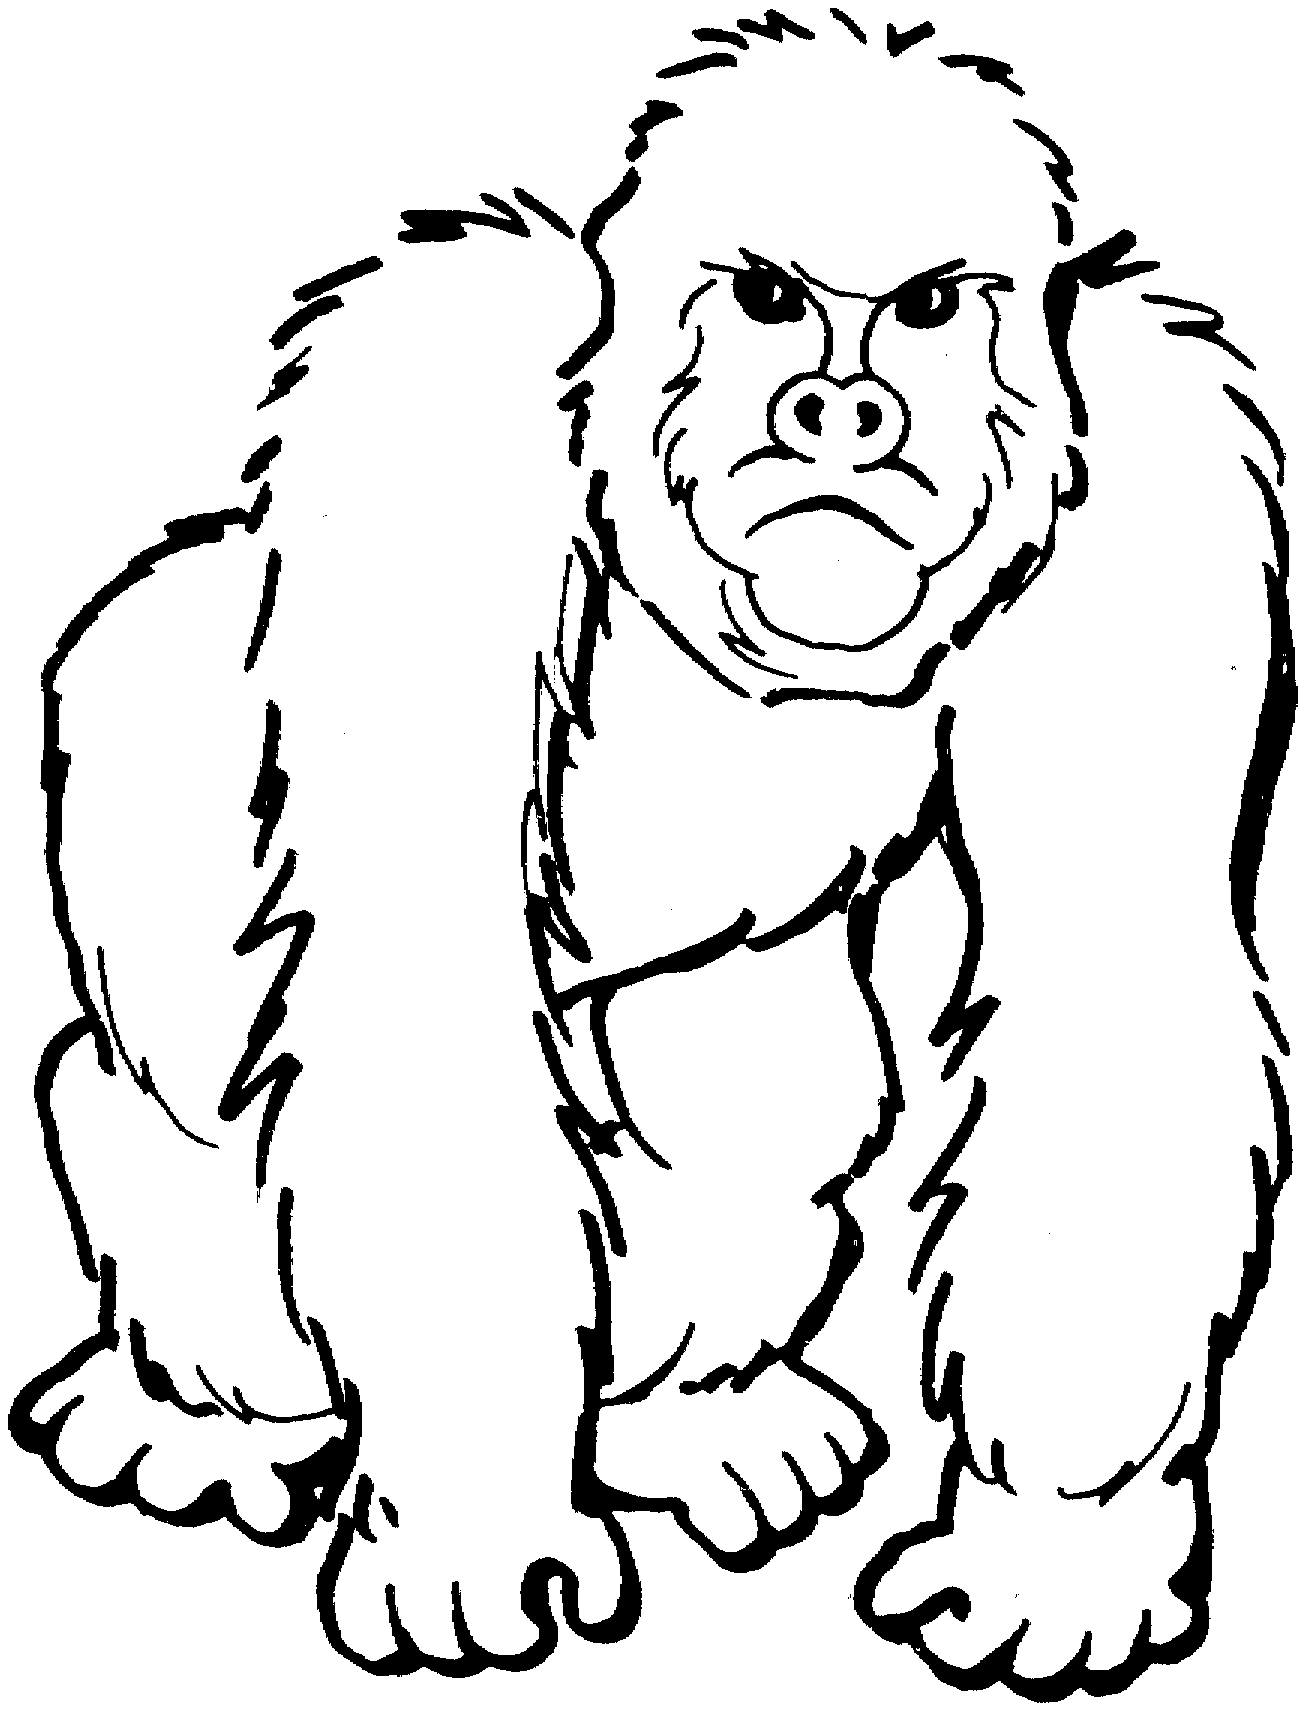 Gorilla Coloring Pages Free | Coloring.Cosplaypic.com